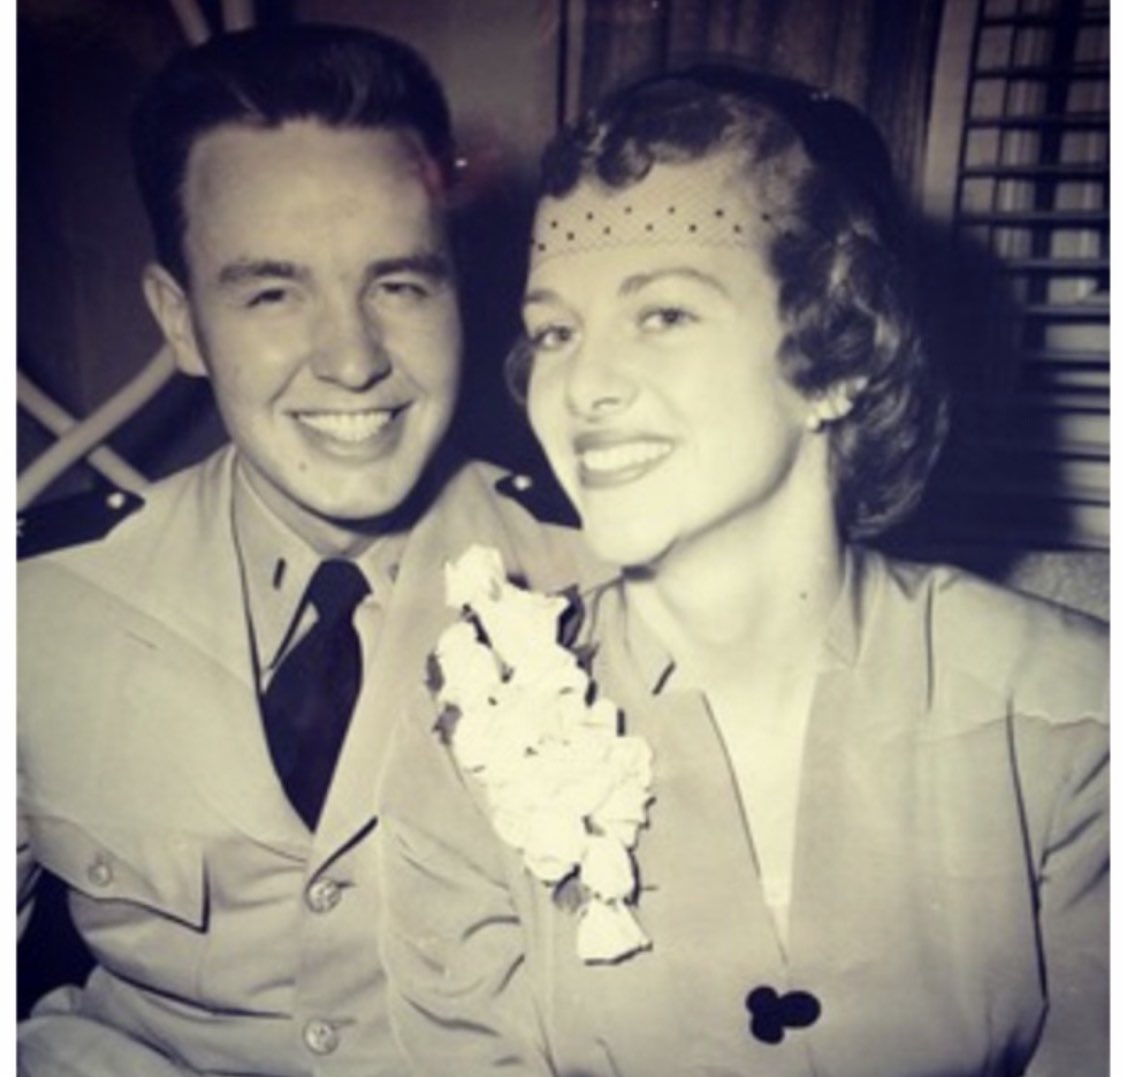 So very grateful my for parents. My father, Dick Thurston, a Naval Academy graduate & pilot met my mother, Mary Lou Jenkins, while she was finishing her degree at Stanford. Married over 50 years, Dad has passed away but my Mom is still going strong at age 90! #GiveThanks